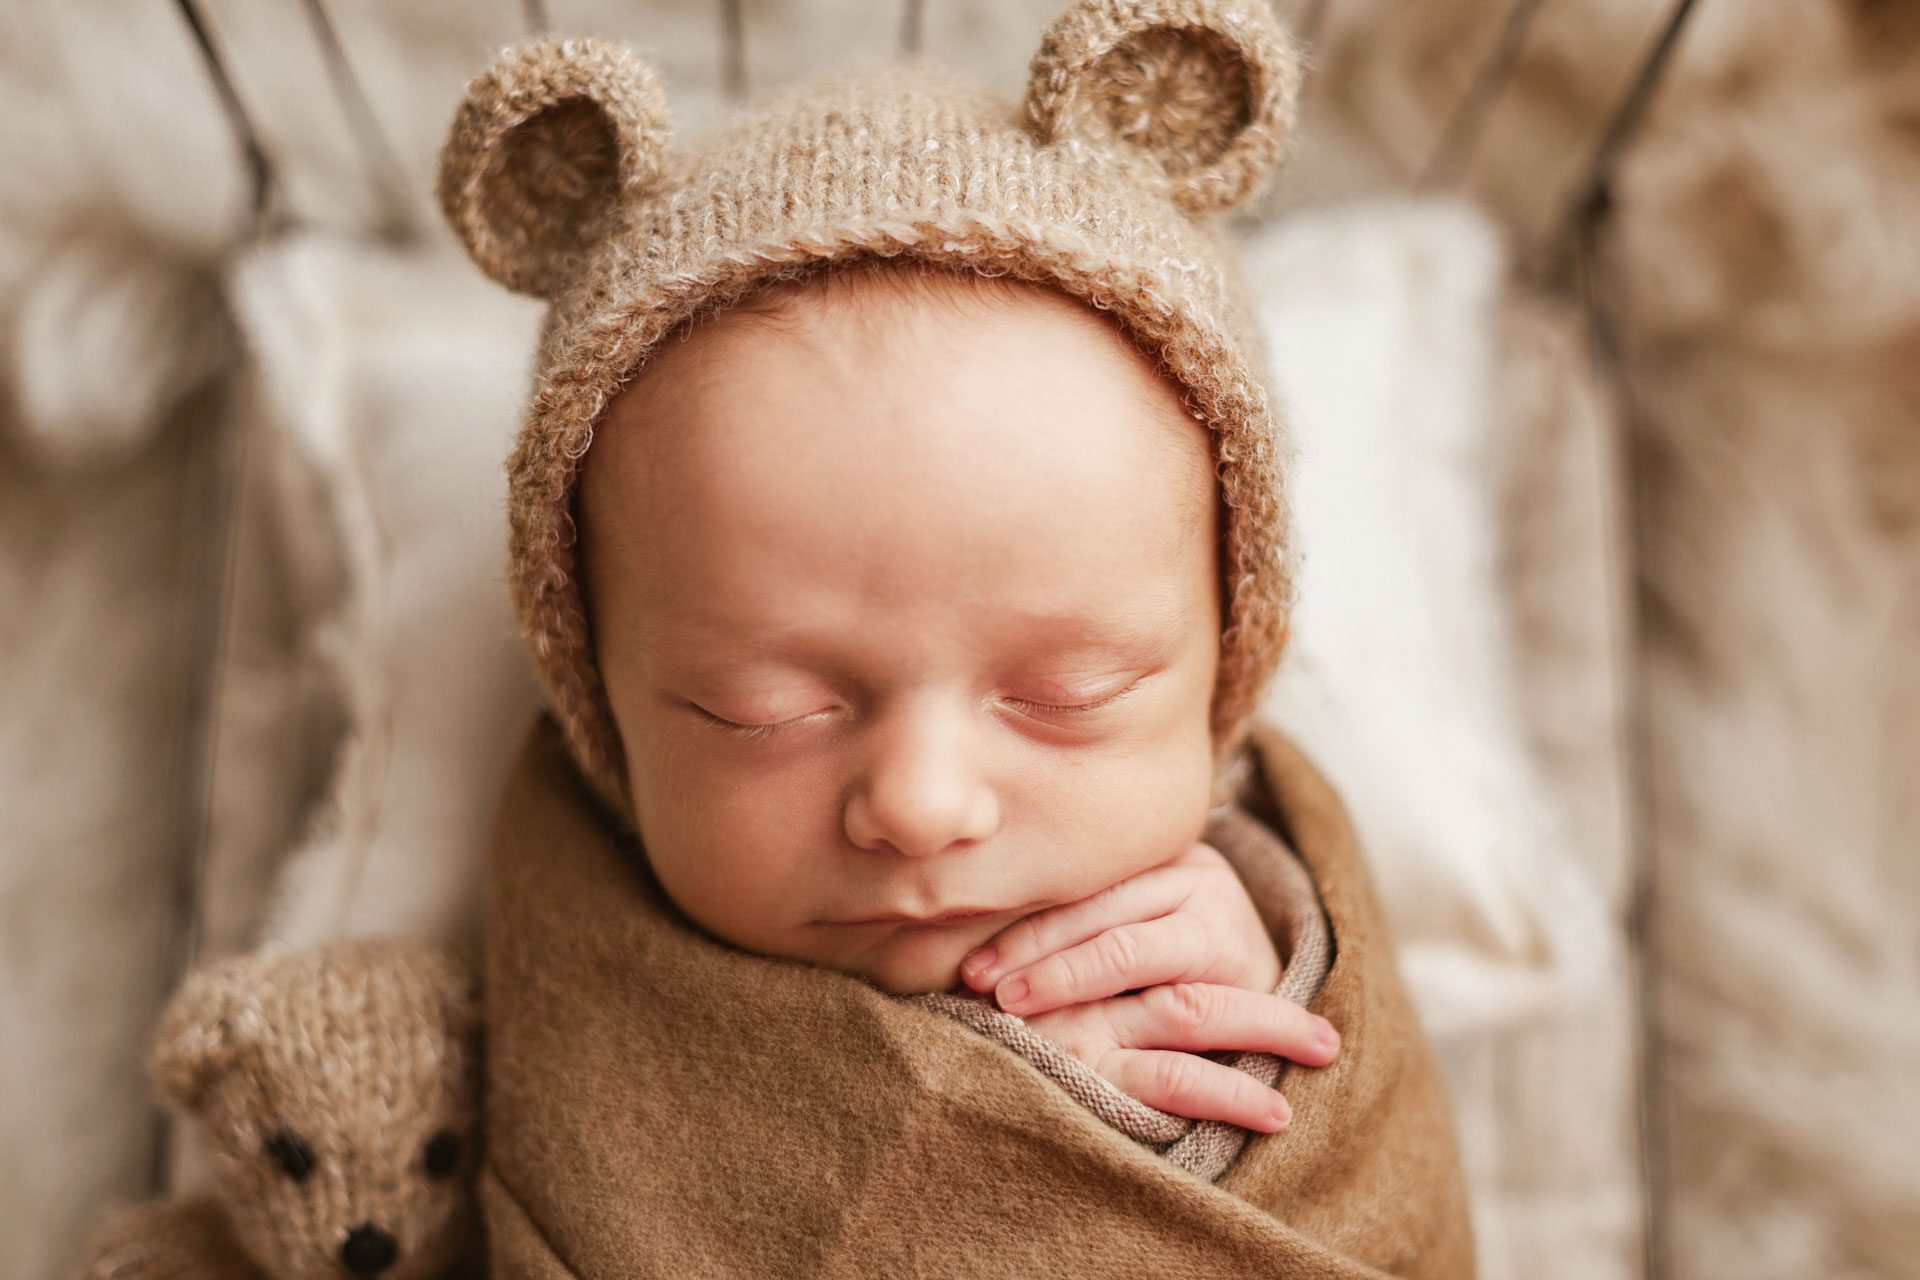 newborn baby wrapped in brown wearing a bear hat sleeping with his hands near his face Nashville baby boutiques